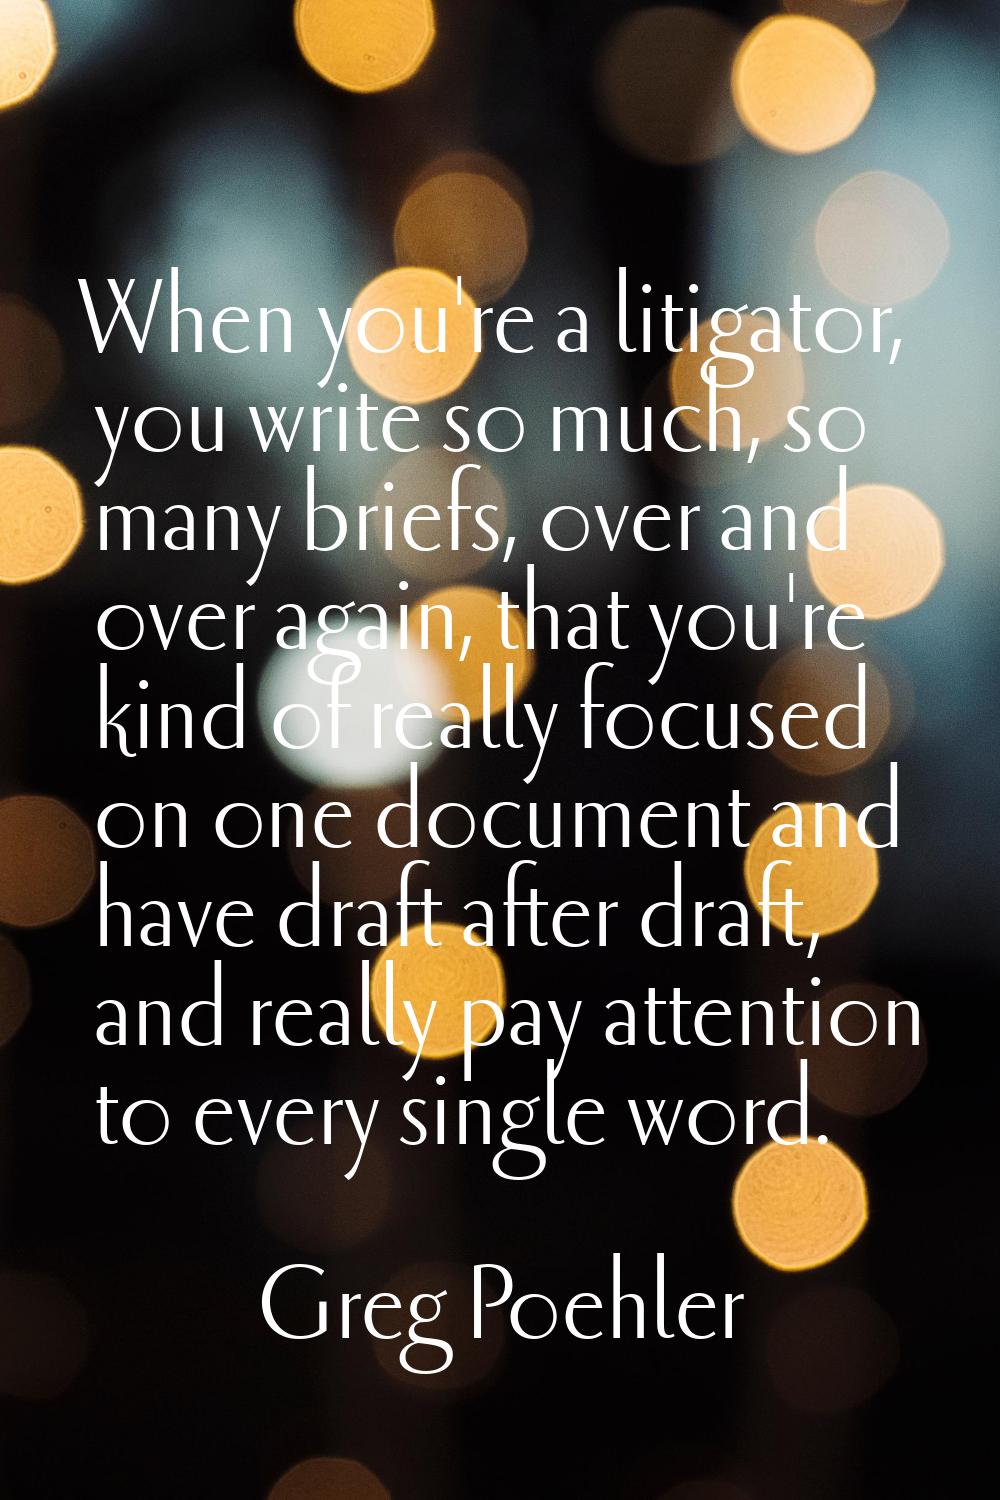 When you're a litigator, you write so much, so many briefs, over and over again, that you're kind o